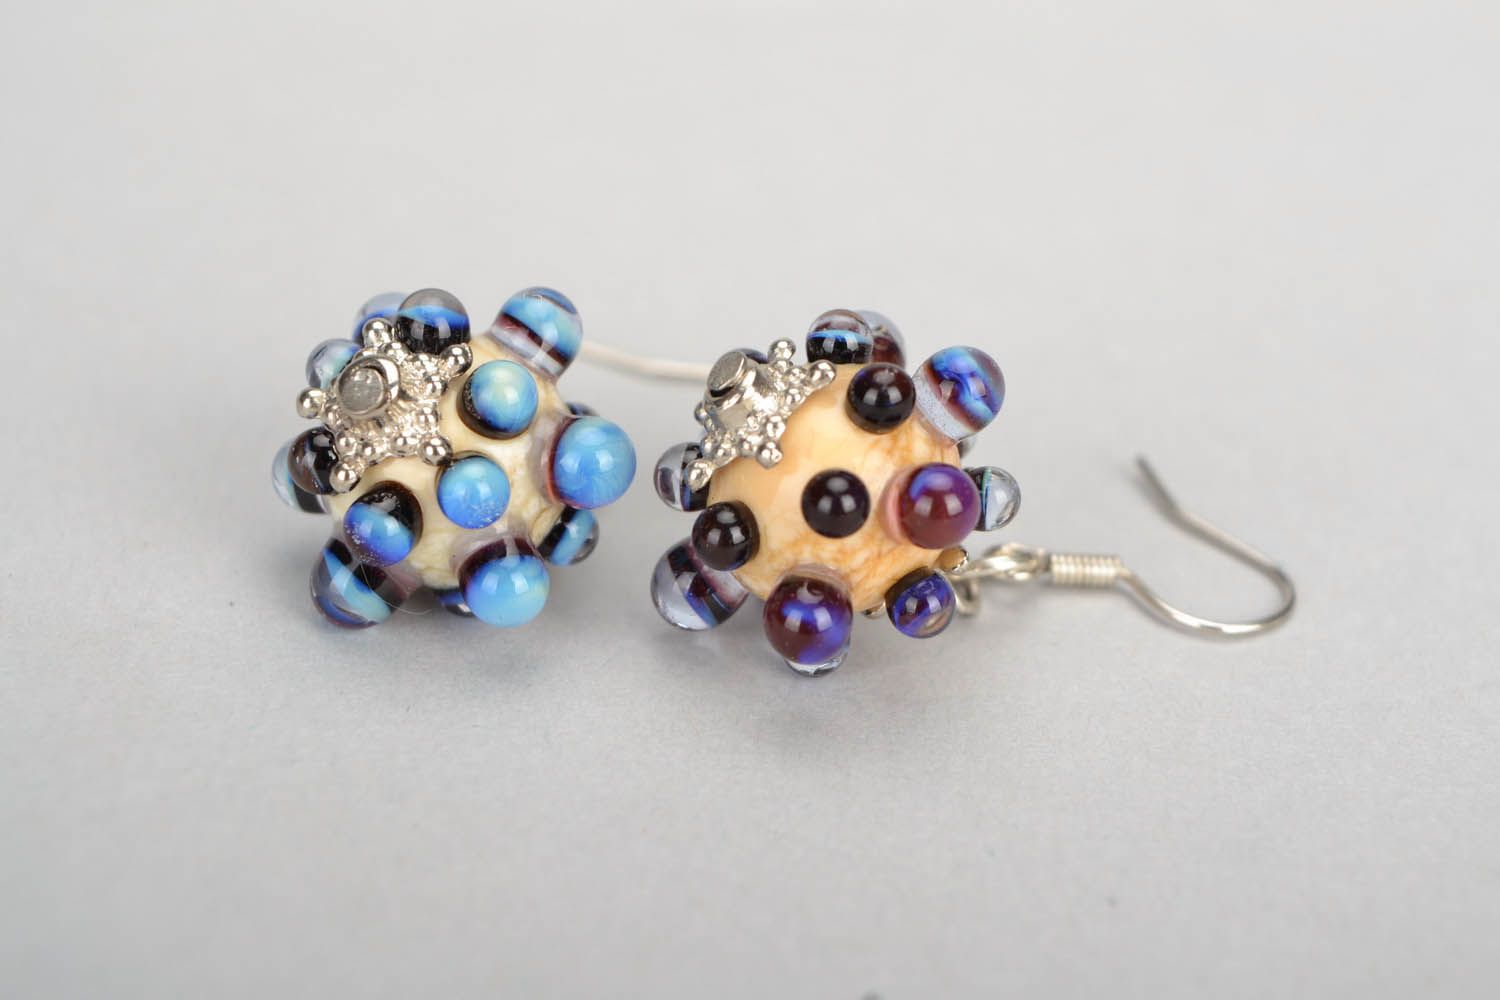 Earrings made using lampwork technique photo 5